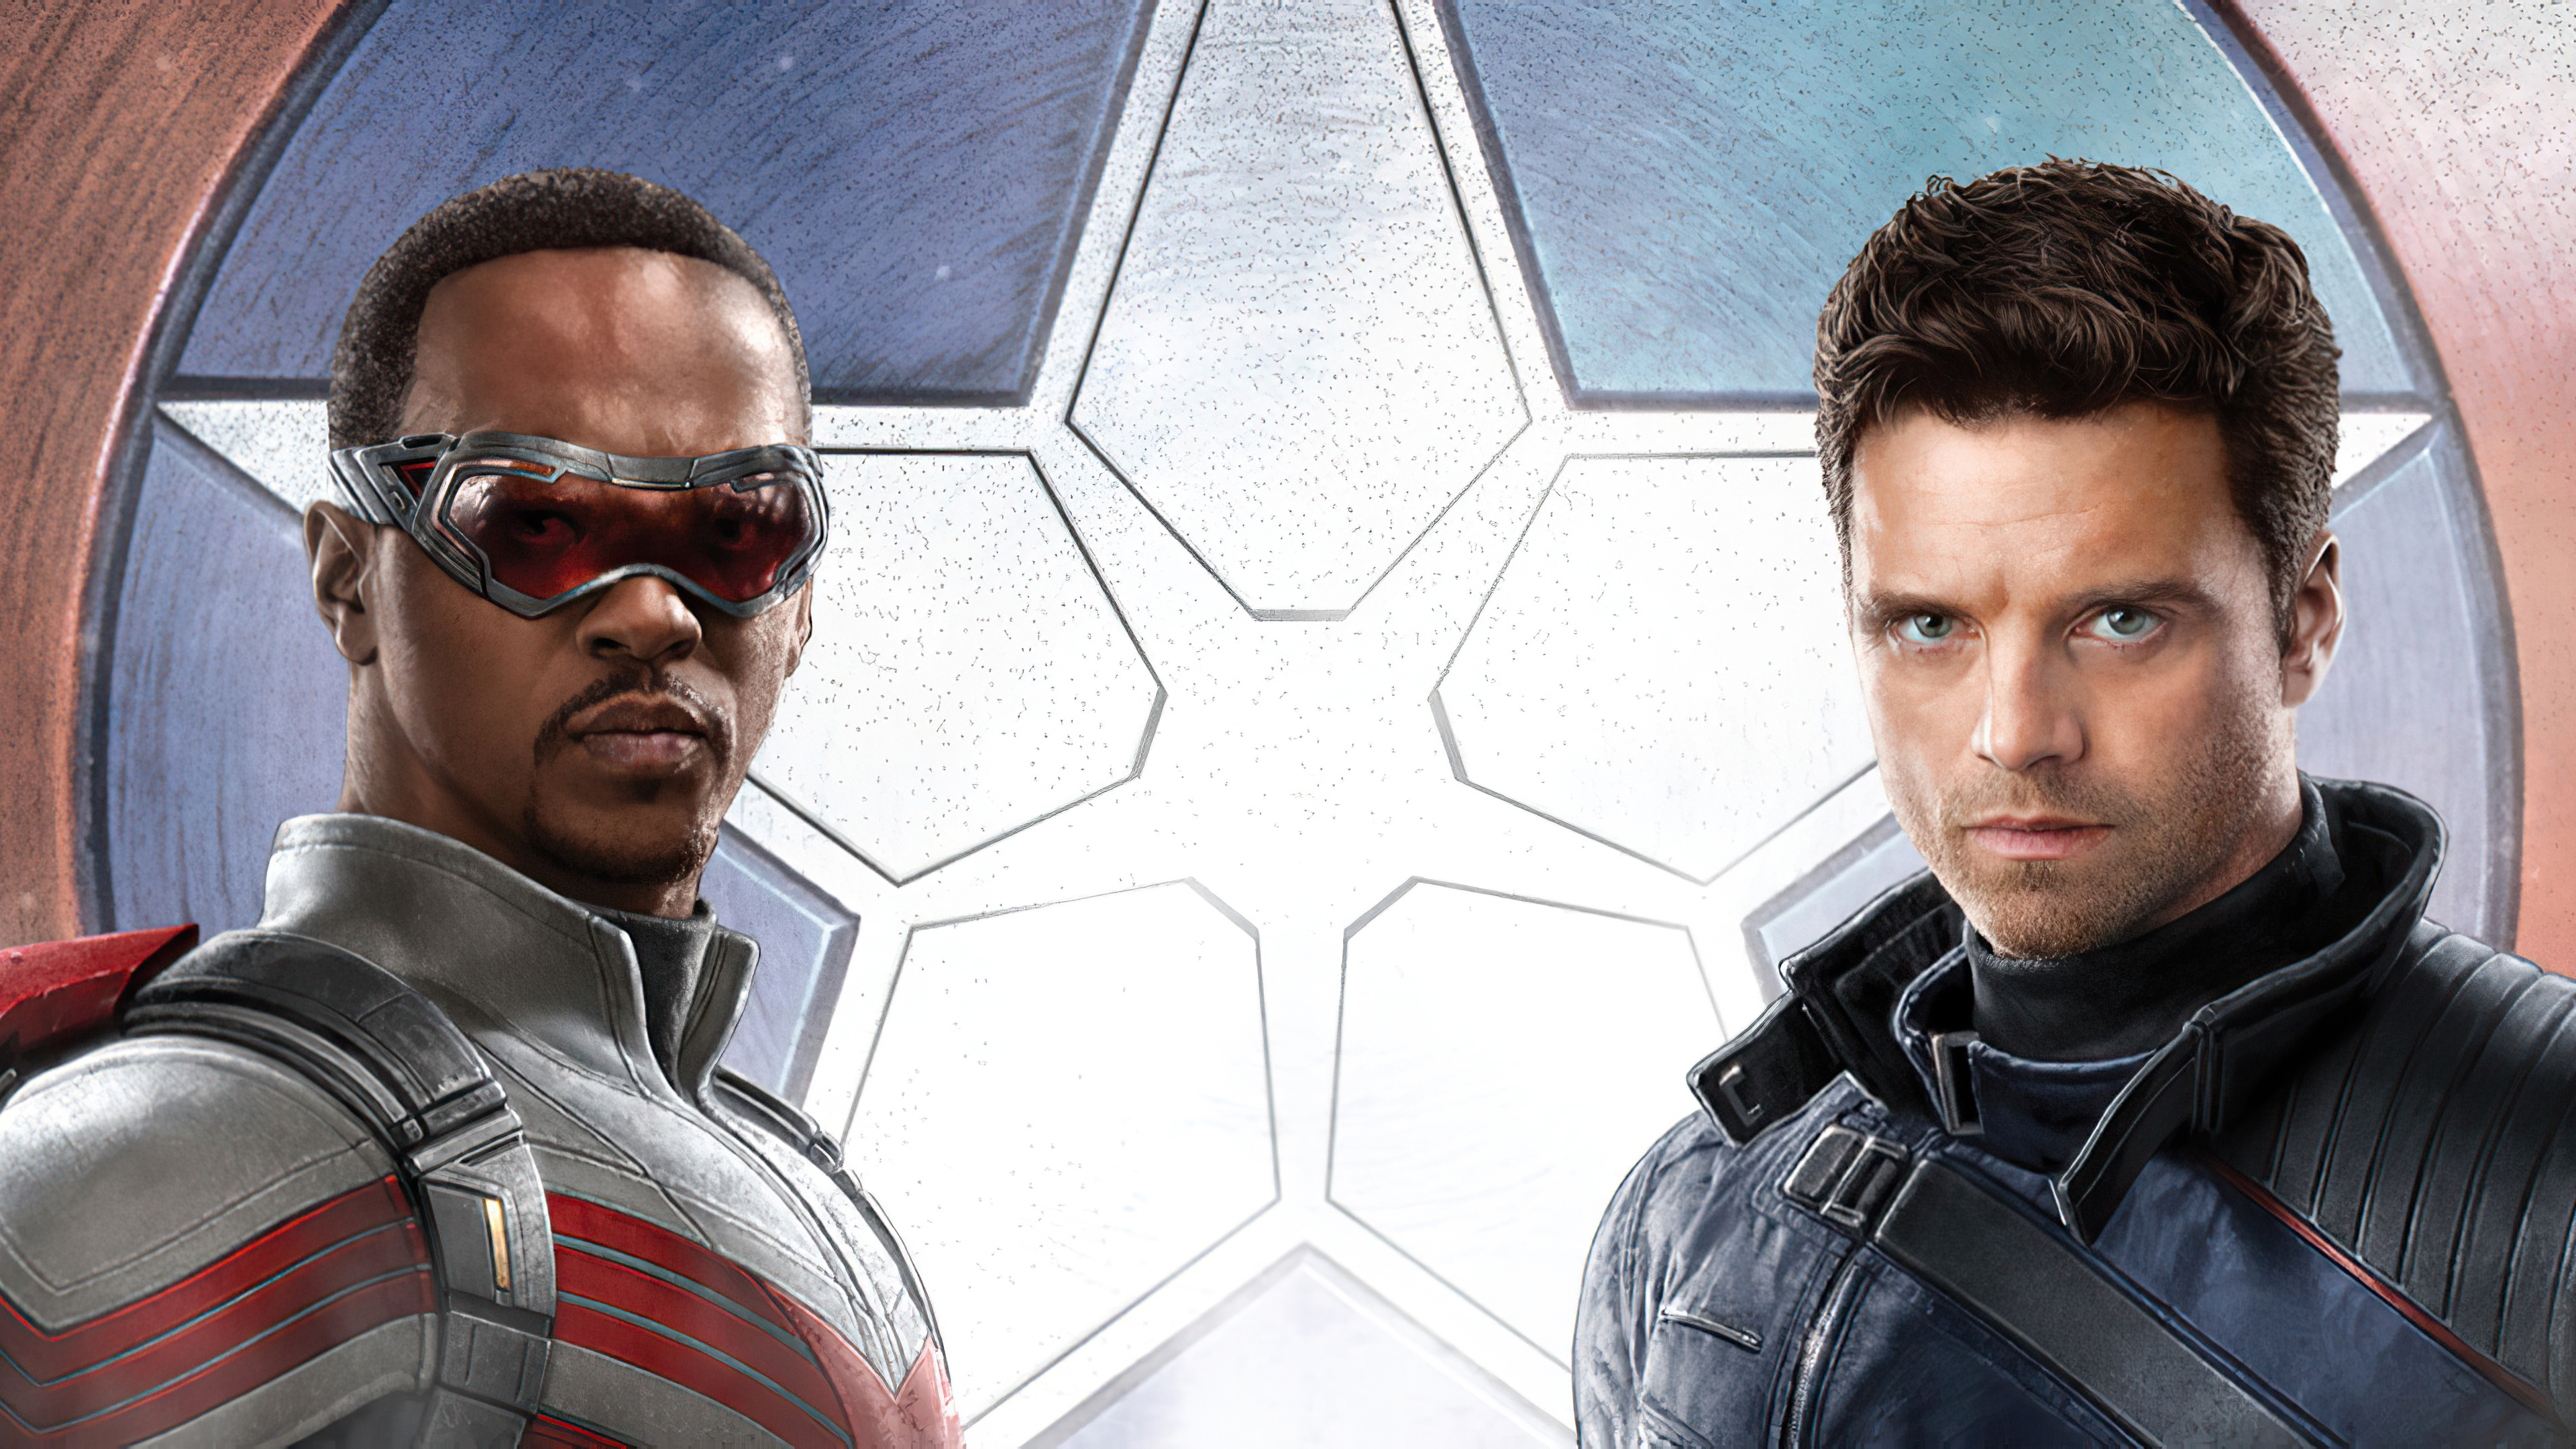 Sebastian Stan, The Falcon and the Winter Soldier, TV show wallpapers, 4K HD imagery, 3840x2160 4K Desktop